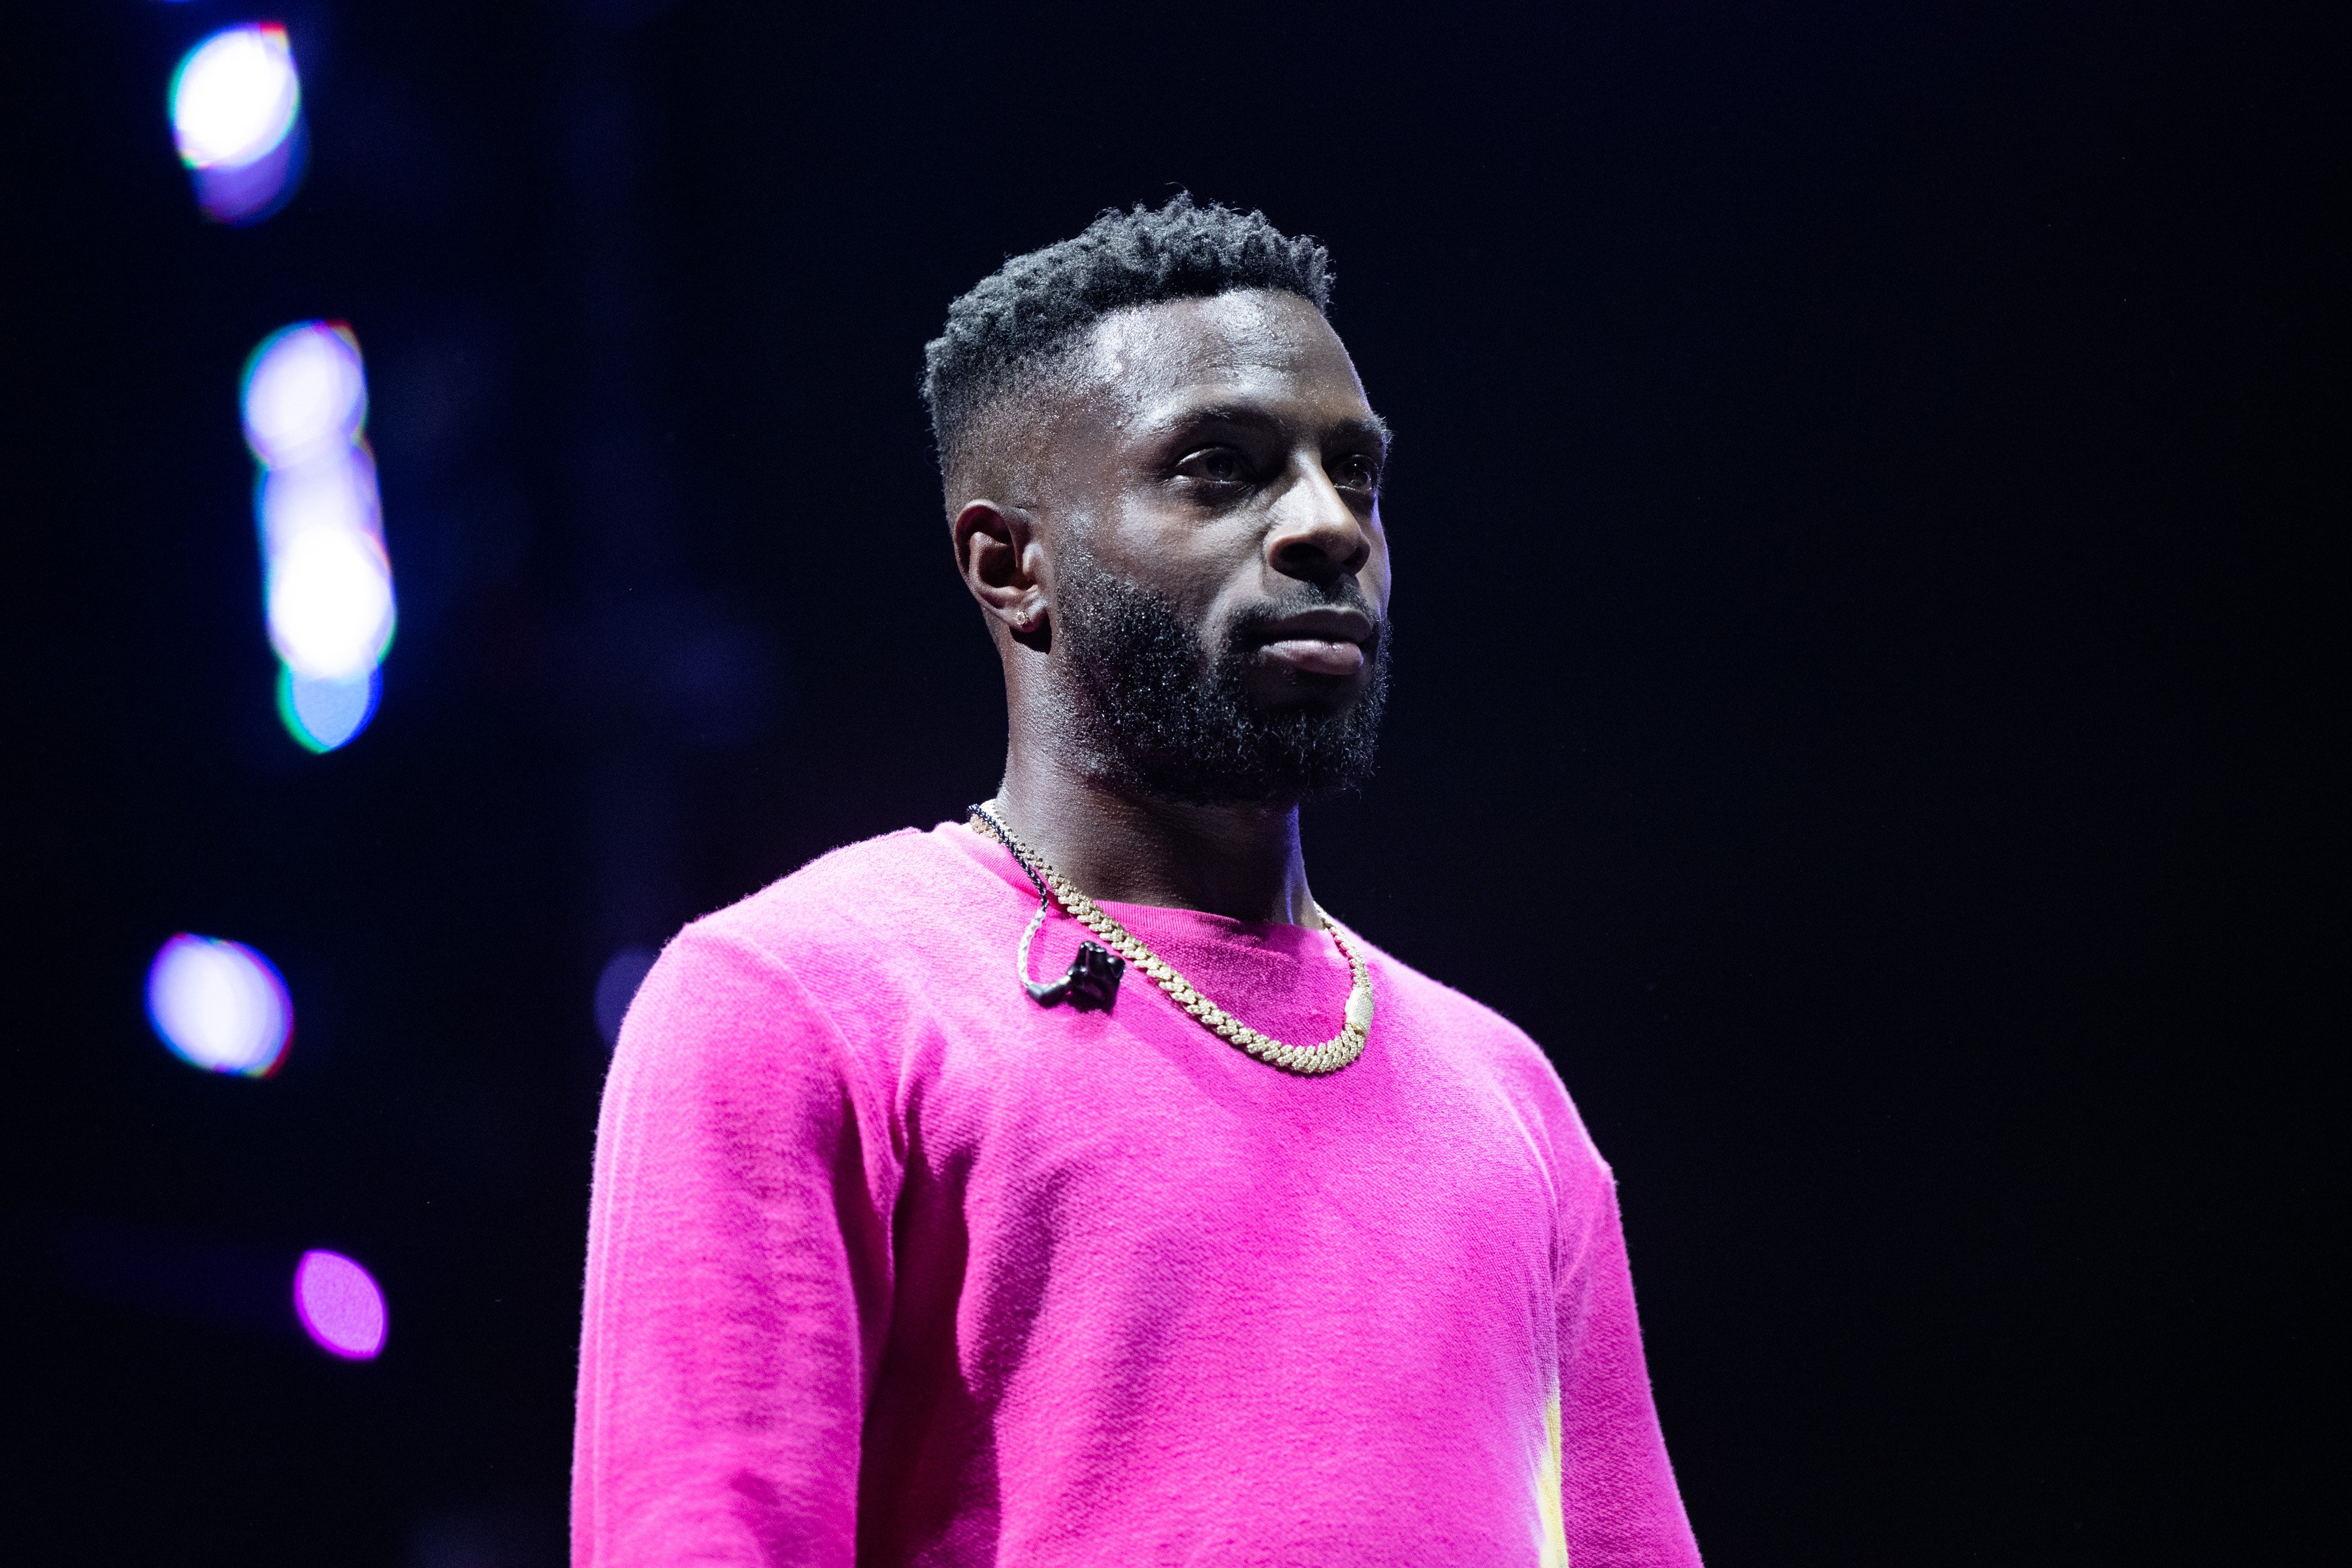 Isaiah Rashad performs in the Sahara Tent during Weekend 2, Day 2 of the 2022 Coachella Valley Music and Arts Festival on April 23, 2022, in Indio, California. | Source: Getty Images